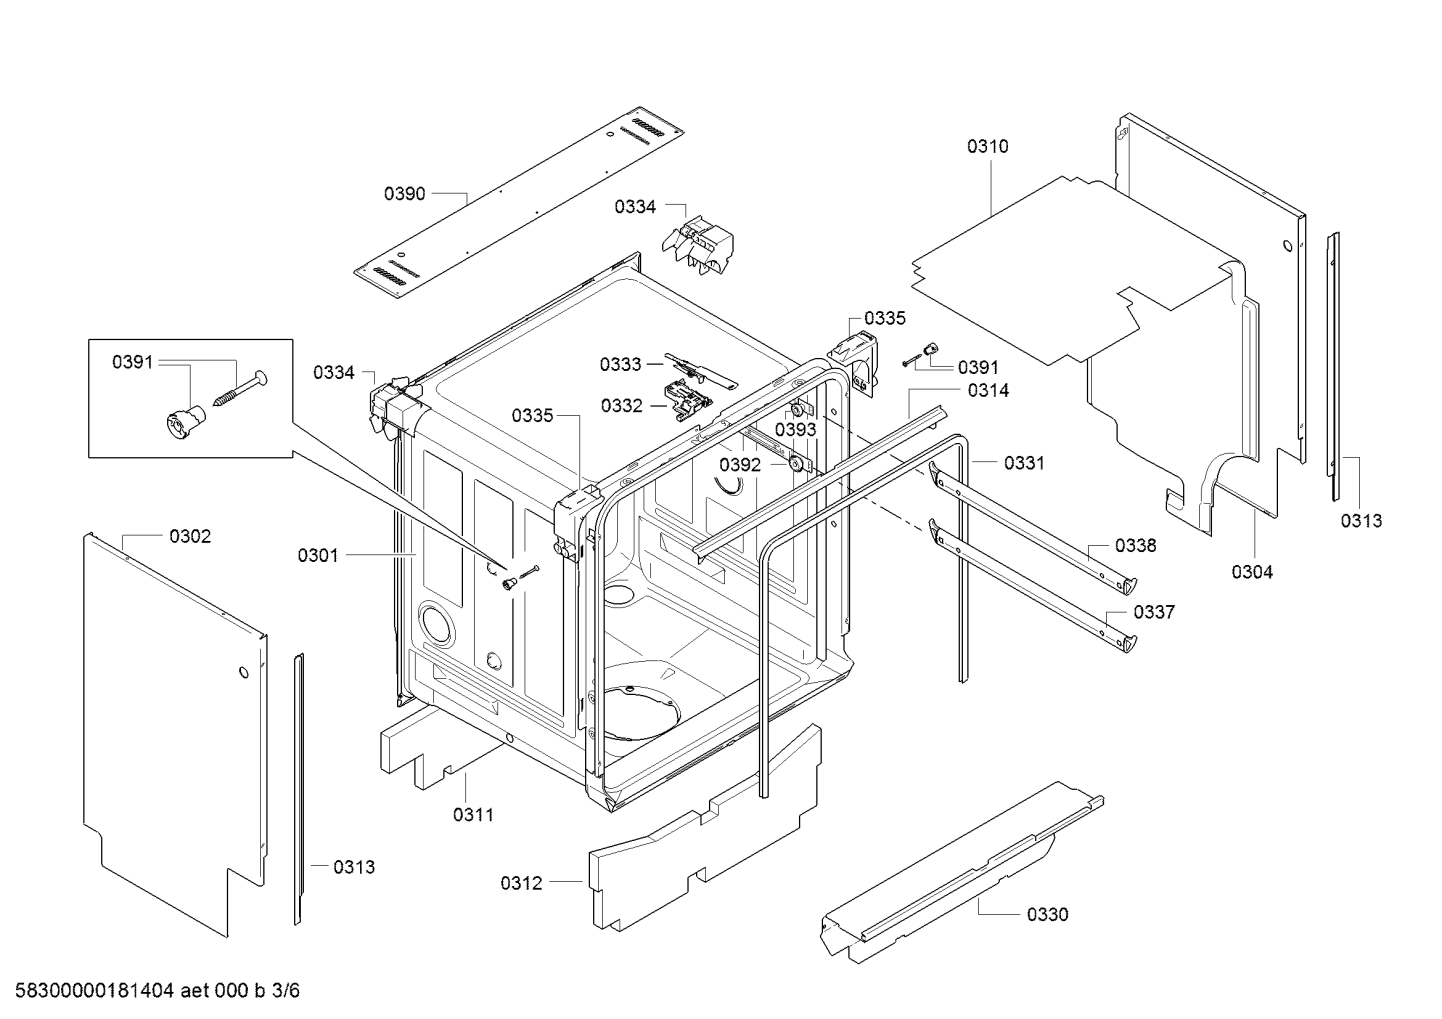 drawing_link_3_device_1737294